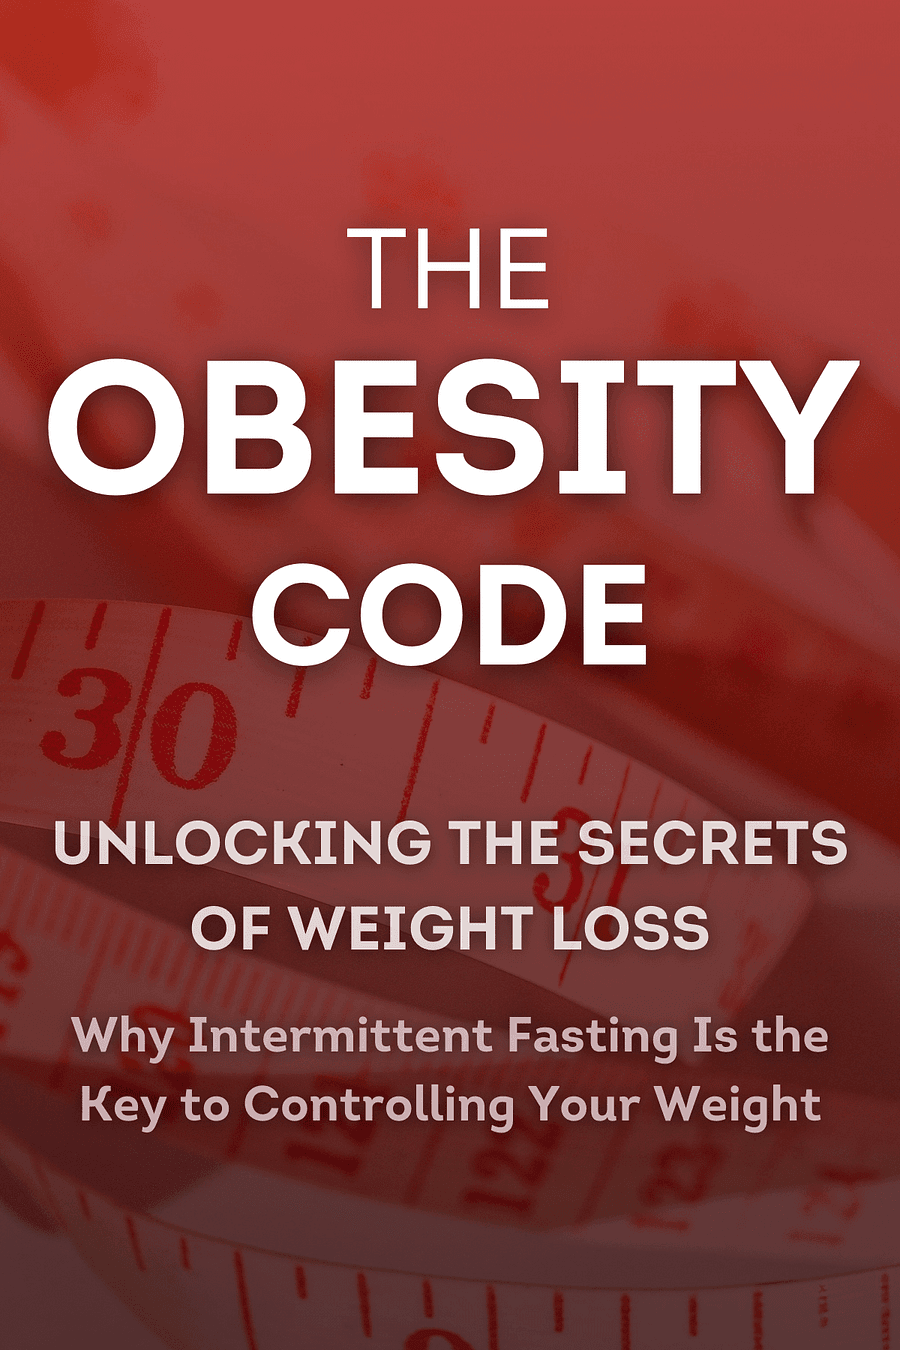 The Obesity Code by Dr. Jason Fung - Book Summary